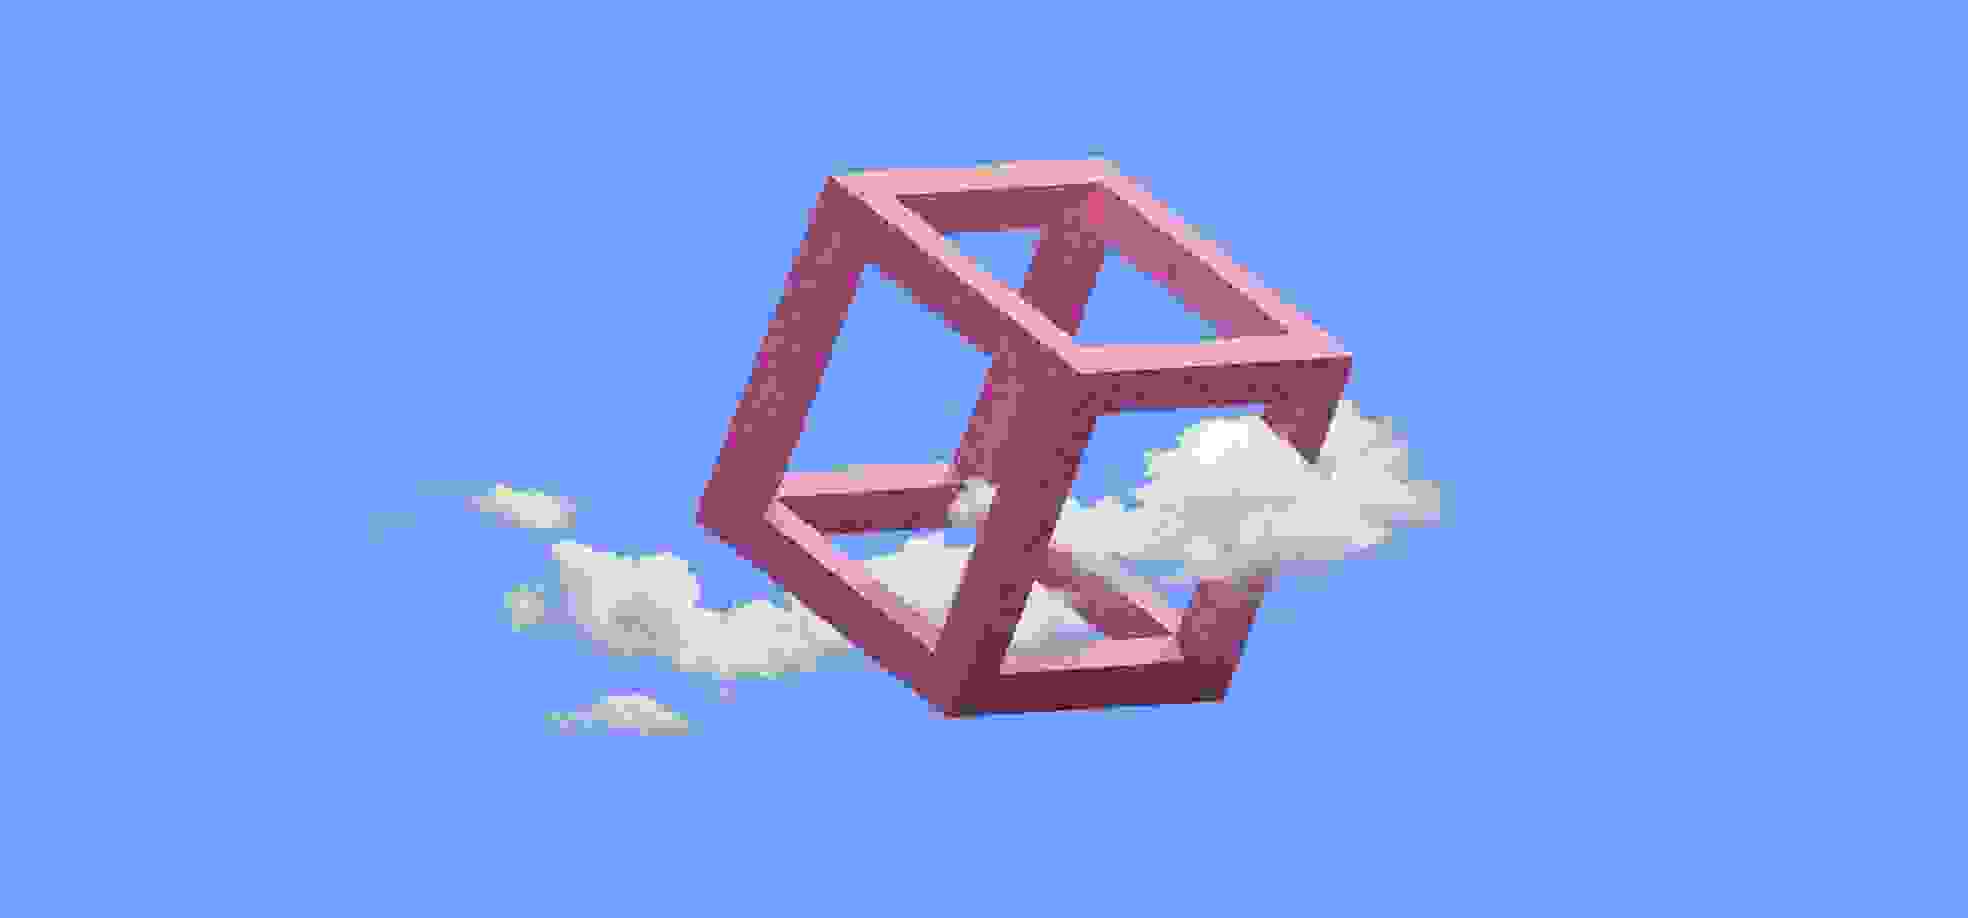 Cube with clouds on the blue background illustration